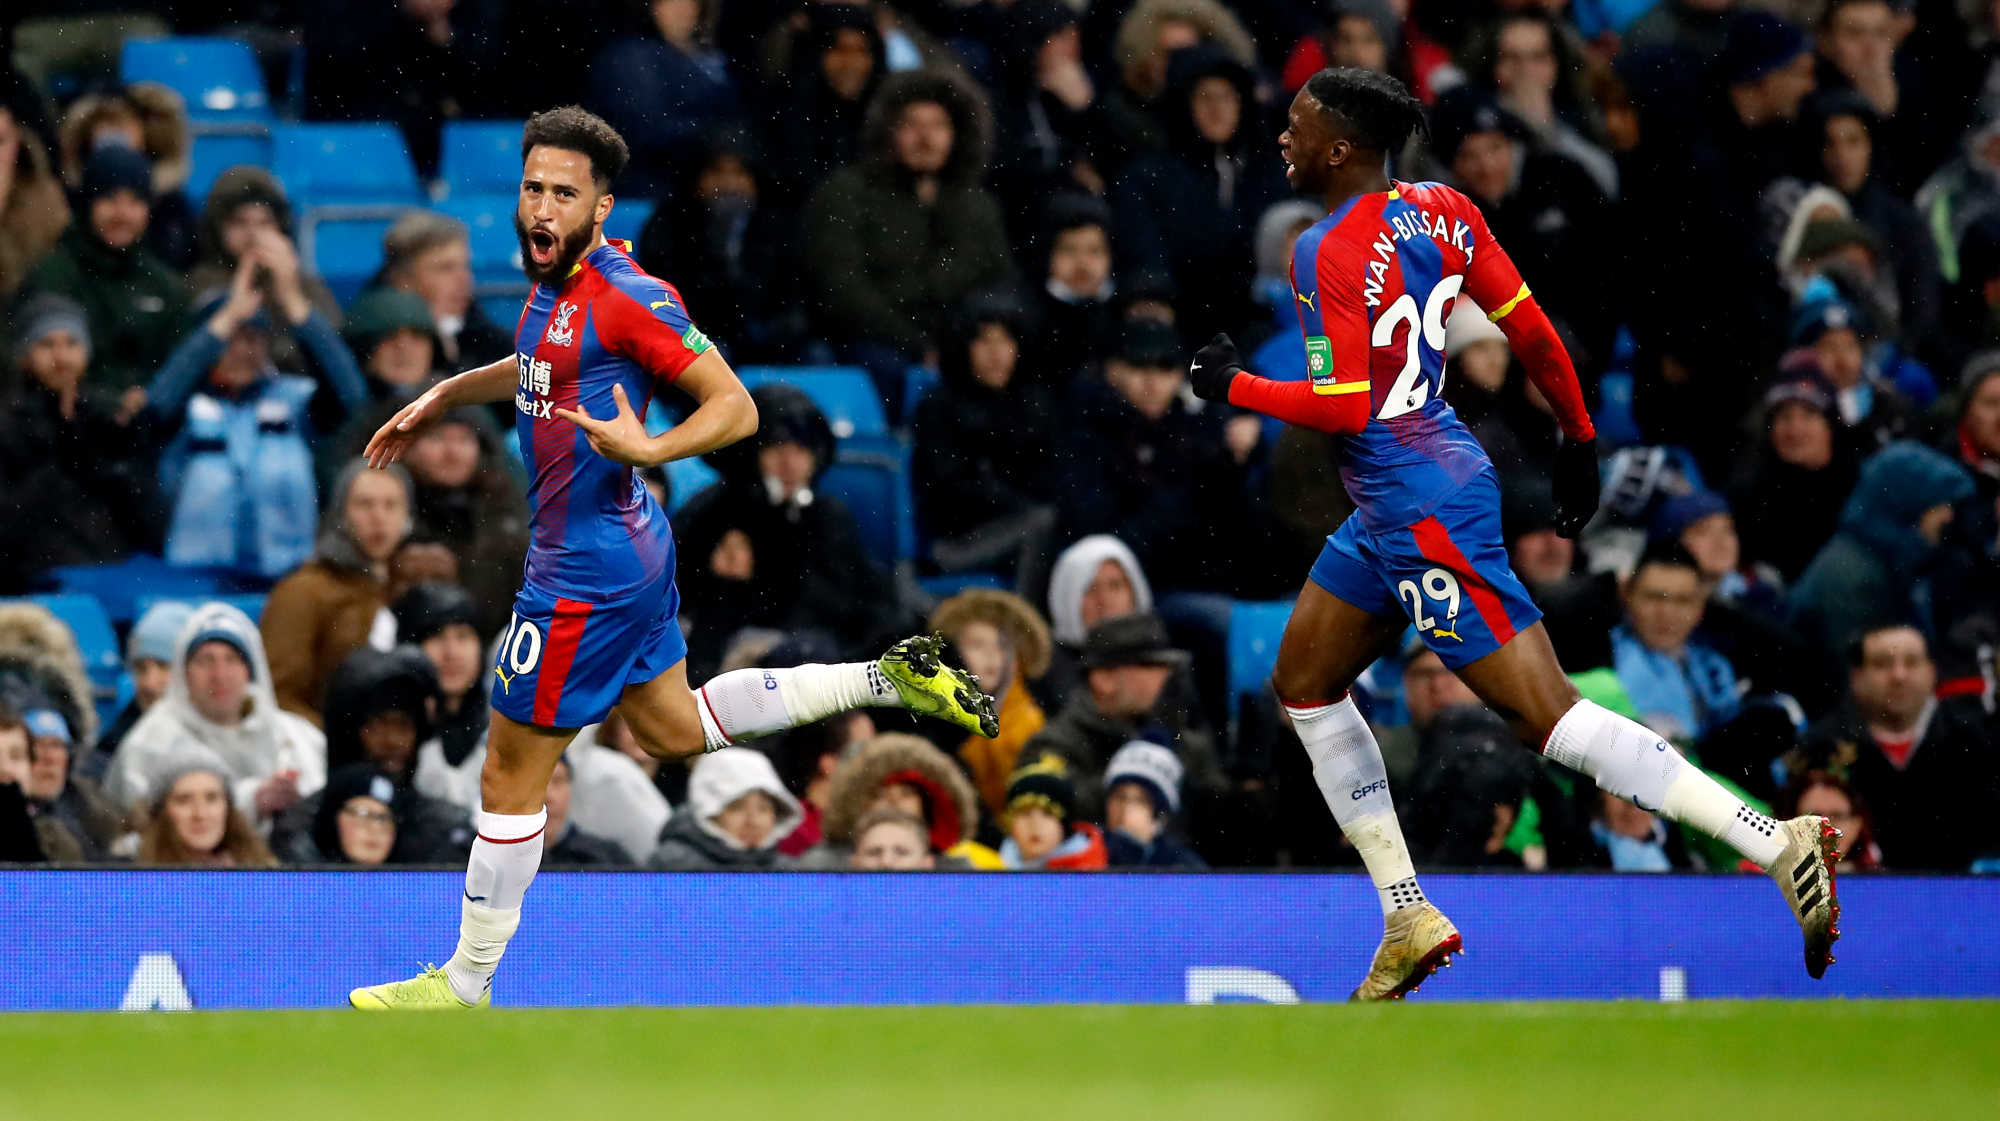 Andros Townsend’s stunning volley against Man City has been nominated for the Puskas award